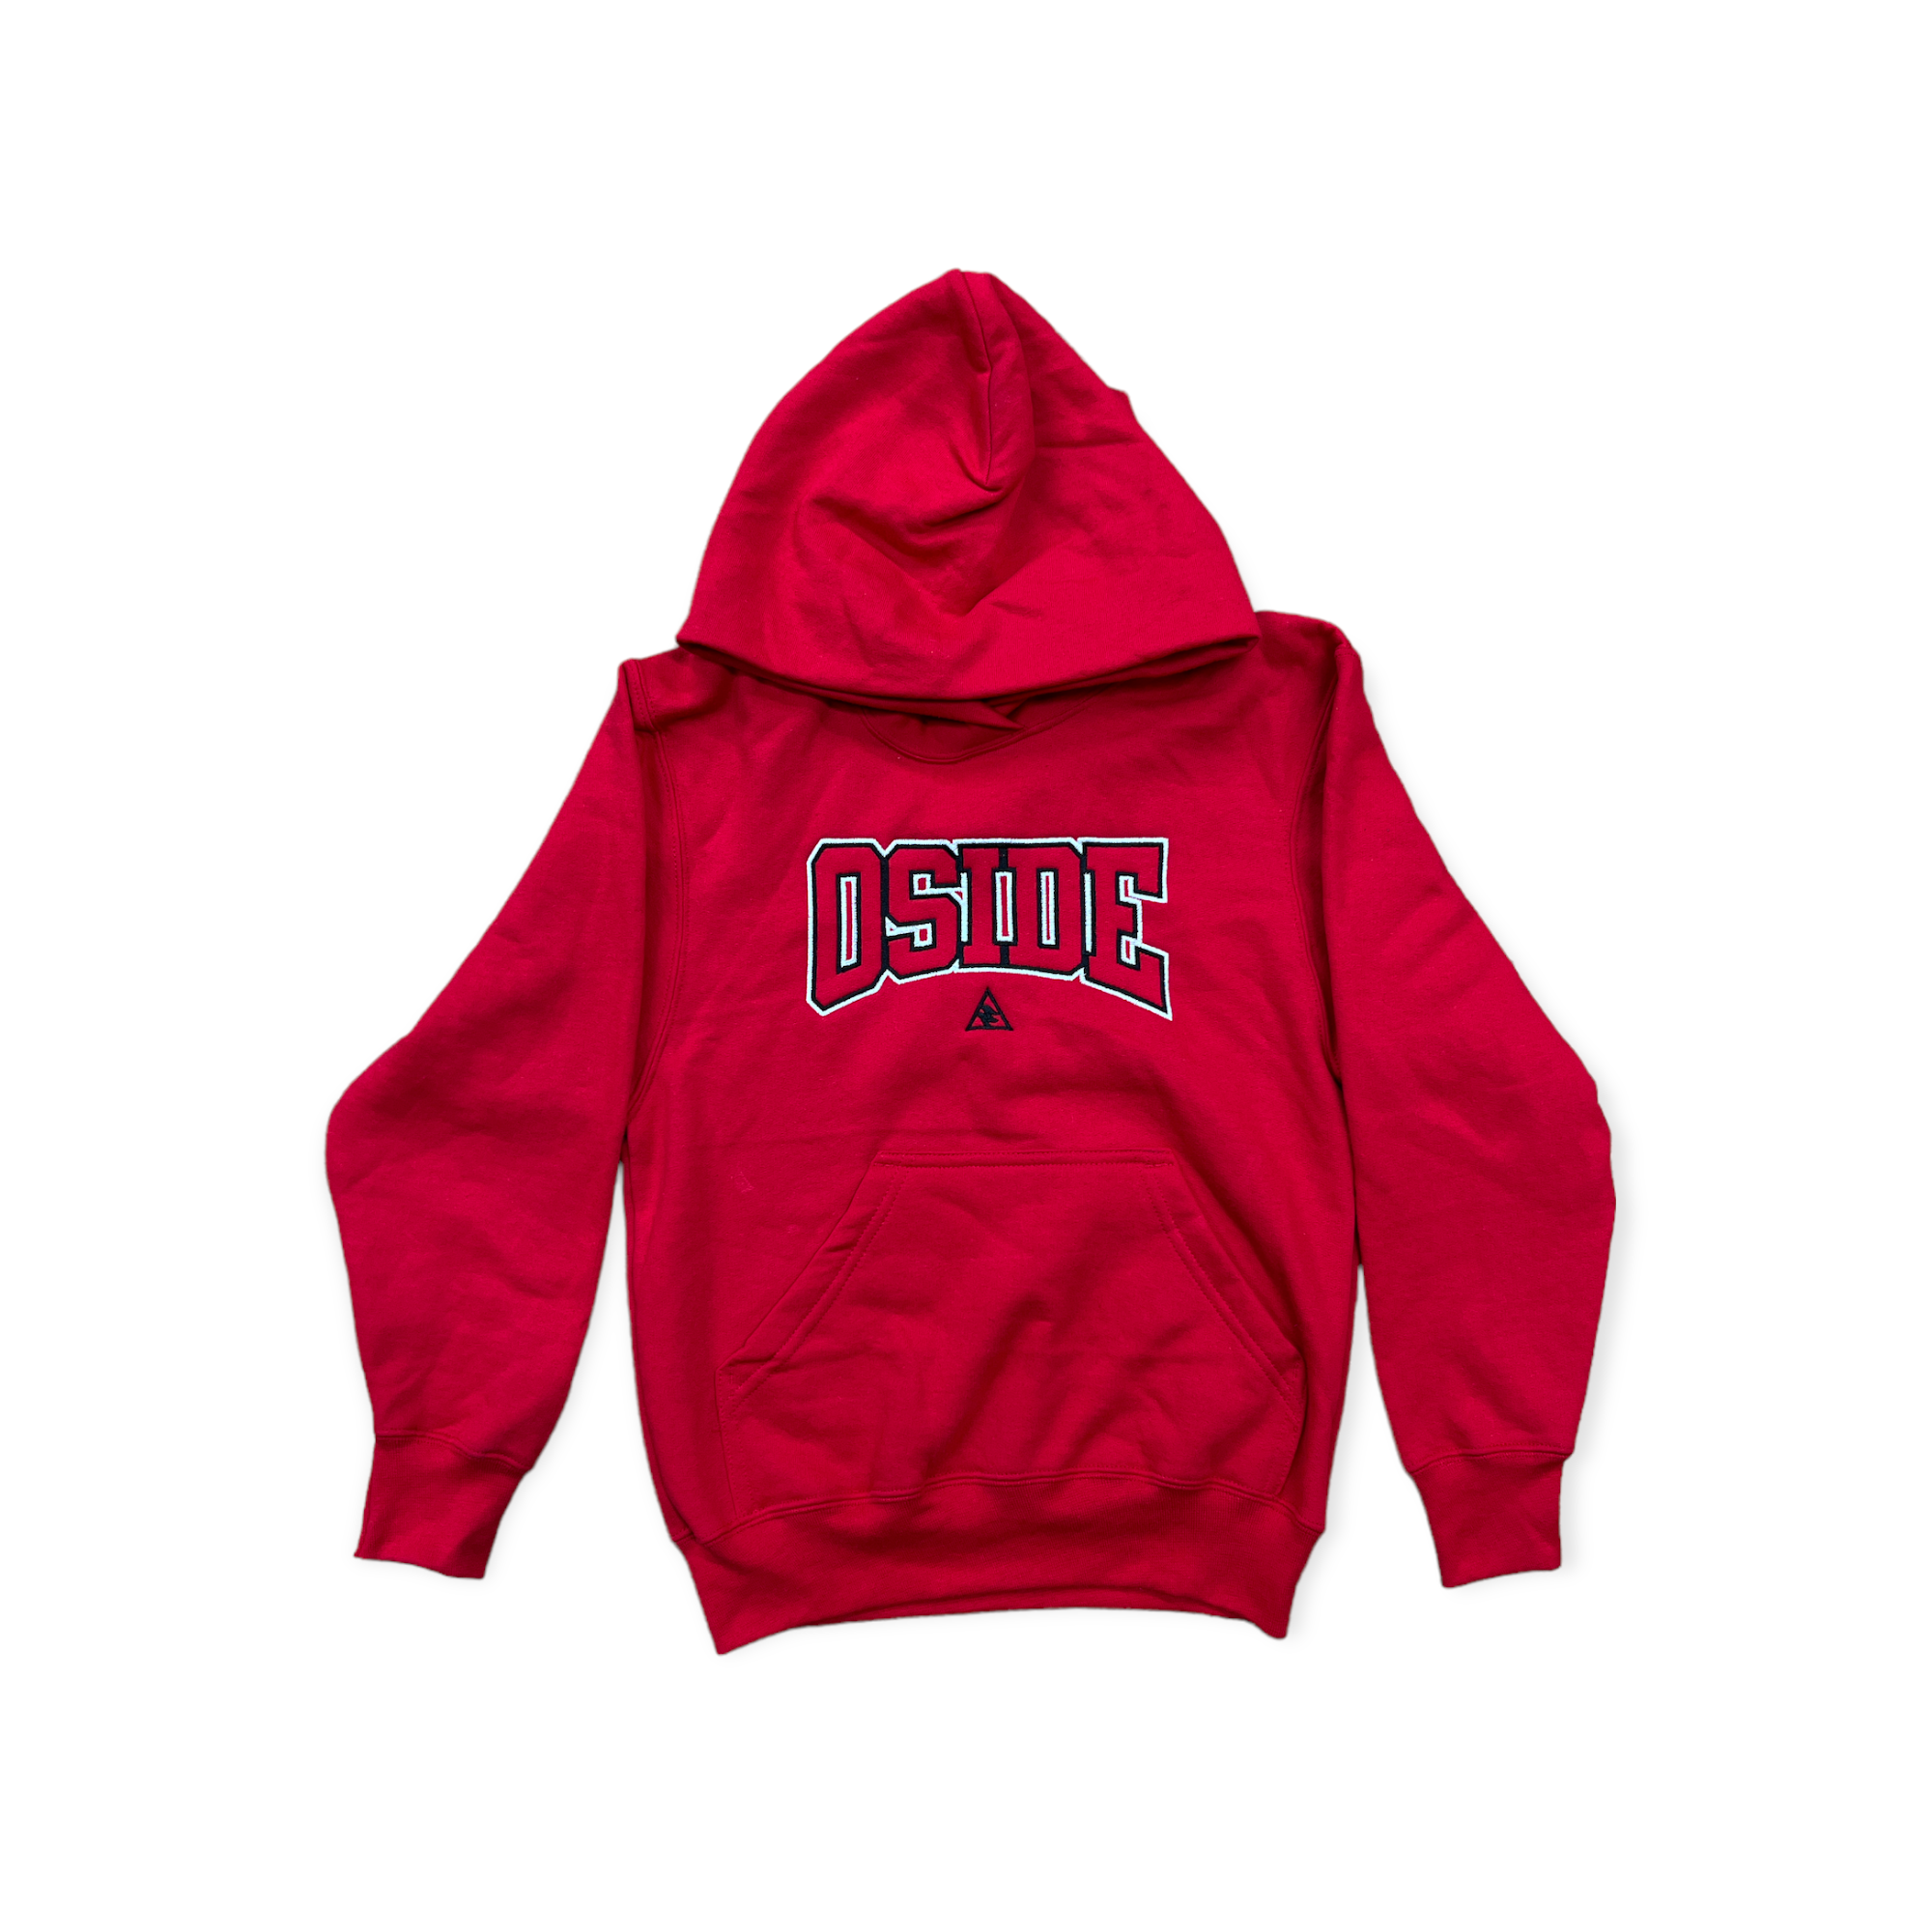 Oside Youth Hoodie (Red)